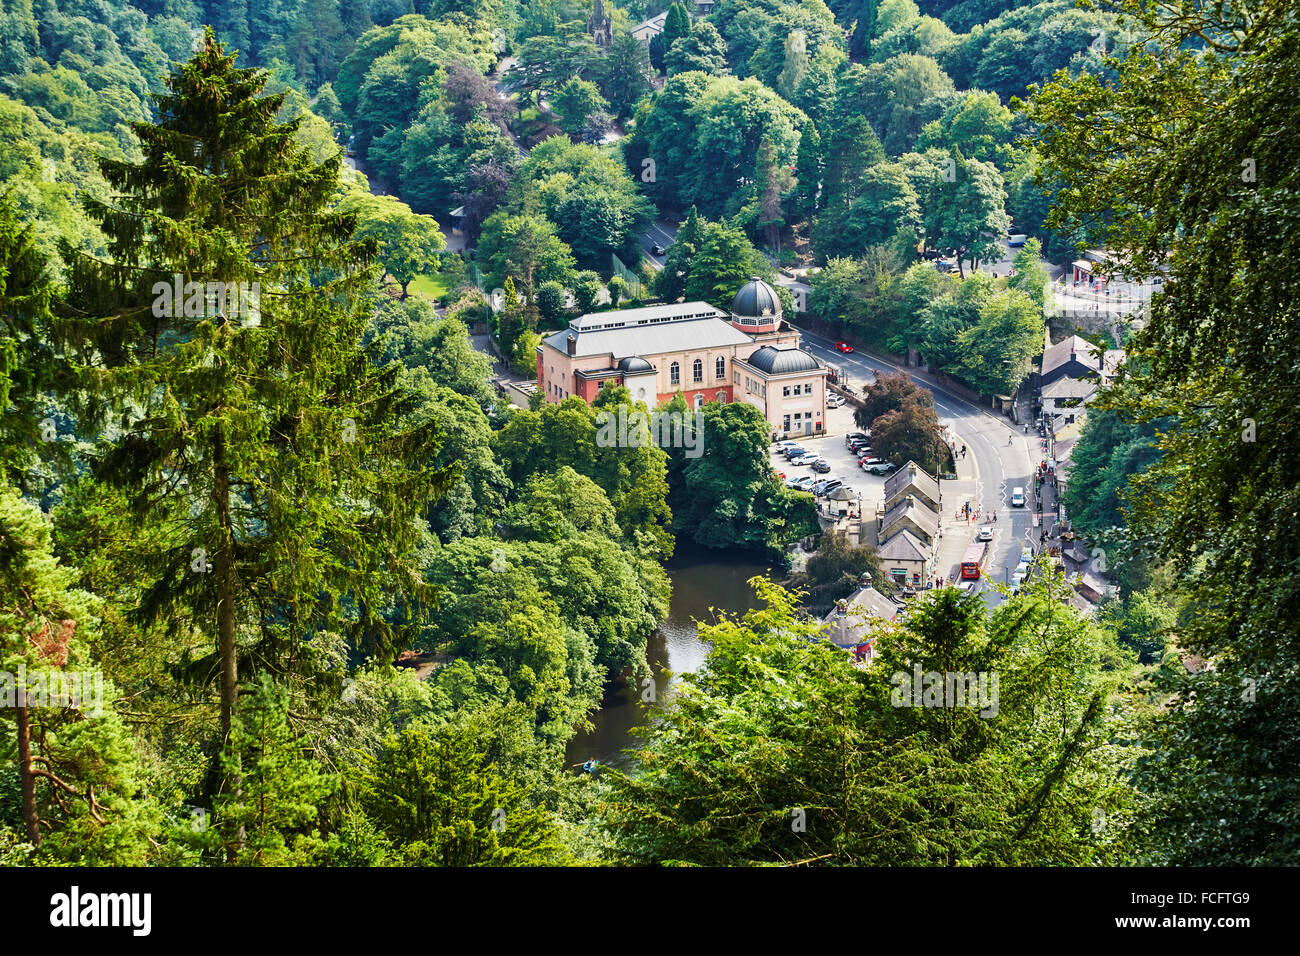 Matlock Bath viewed from the Heights of Abraham, Derbyshire, England, UK. Stock Photo